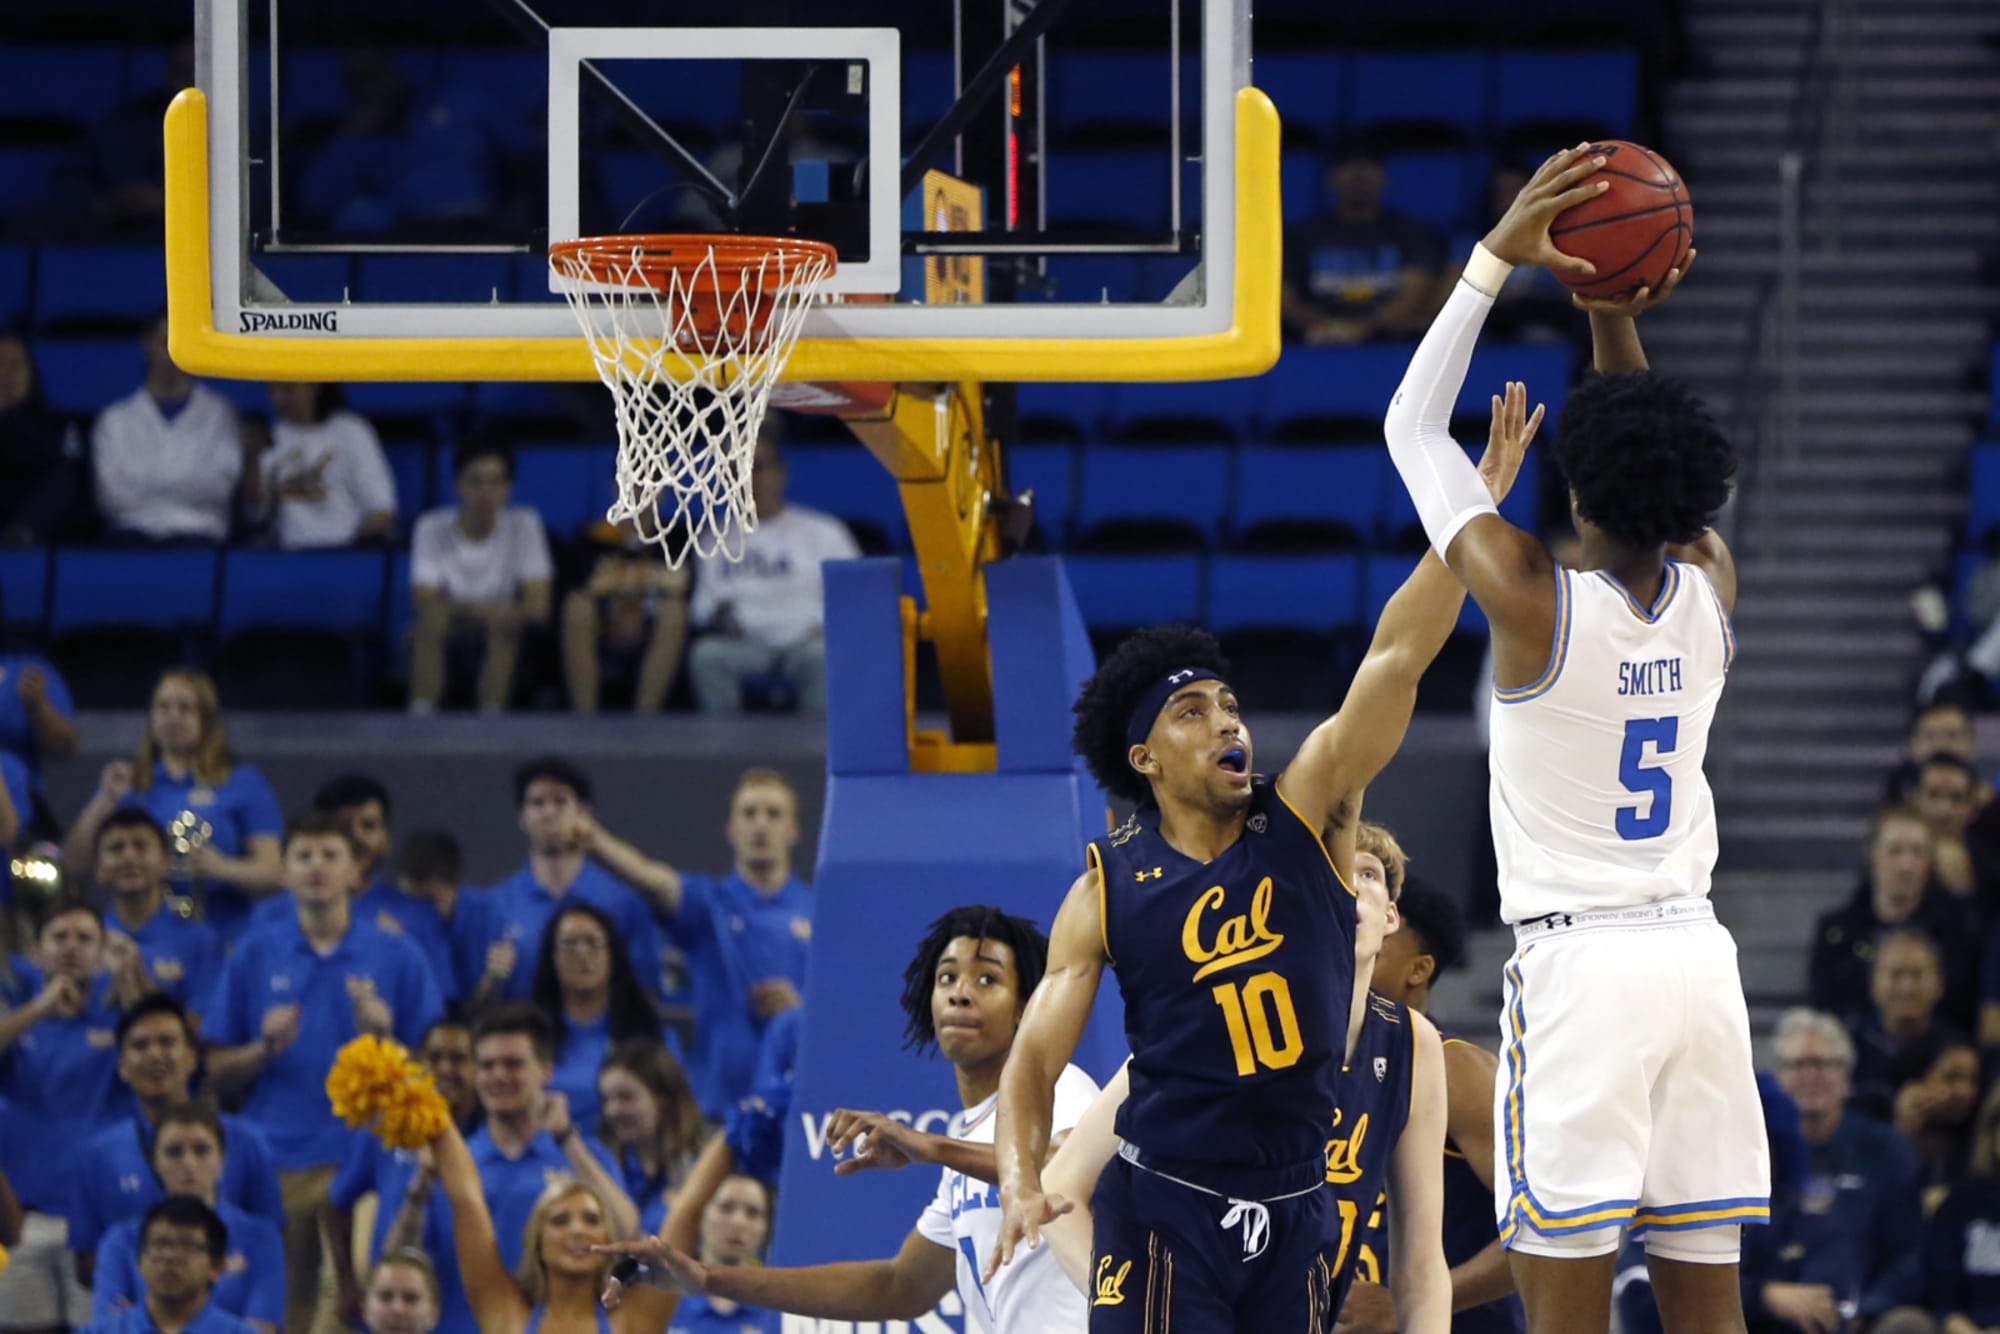 UCLA Basketball The Bruins' role players are rising under Murry Bartow